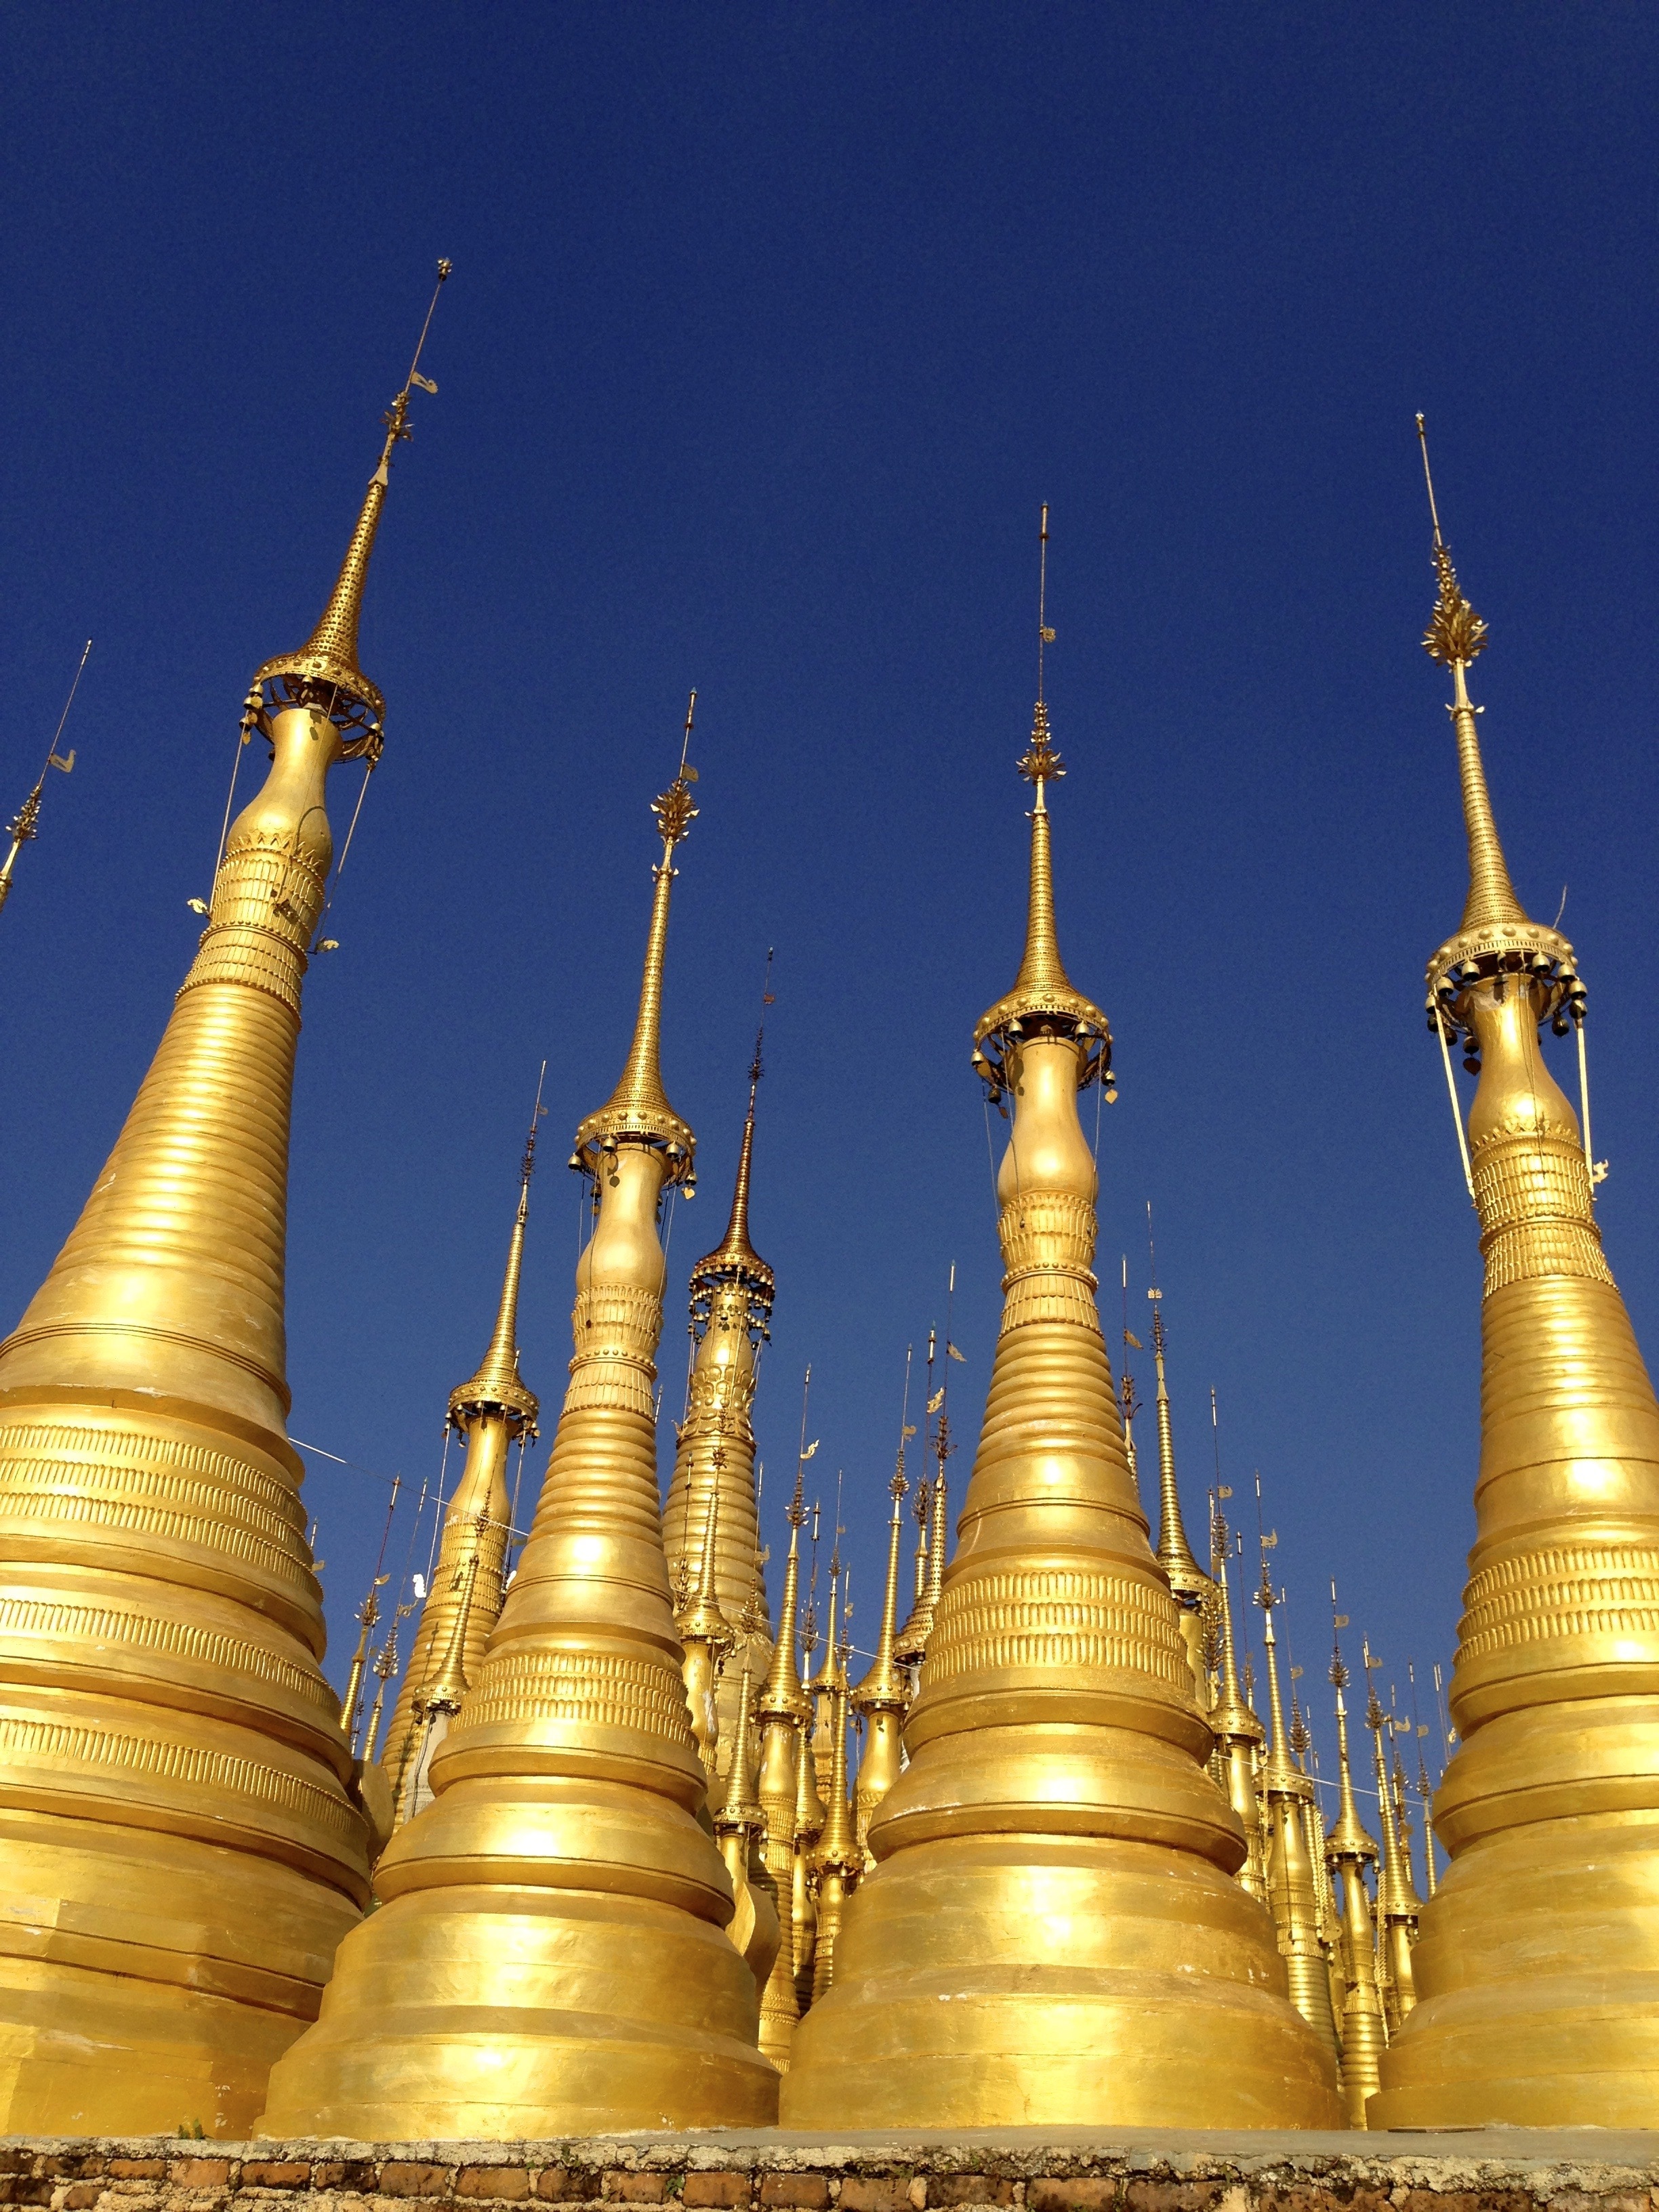 Spires, Temple, Religion, Pagoda, gold colored, religion